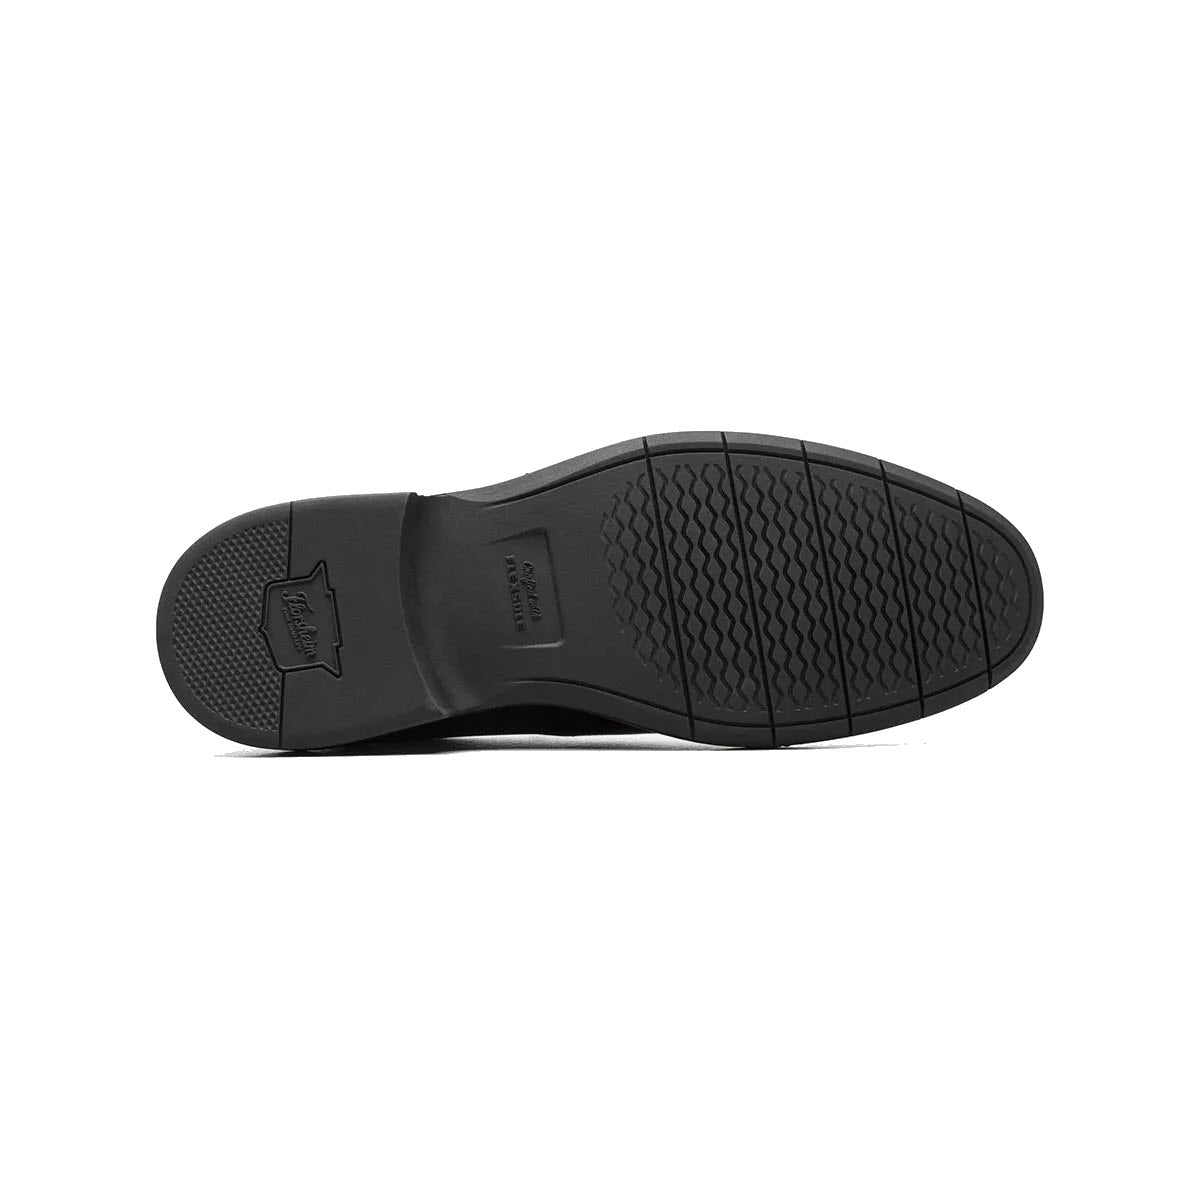 Black rubber sole of a shoe with textured tread and embossed Florsheim Norwalk Moc Toe Slip On Black - Mens logo.